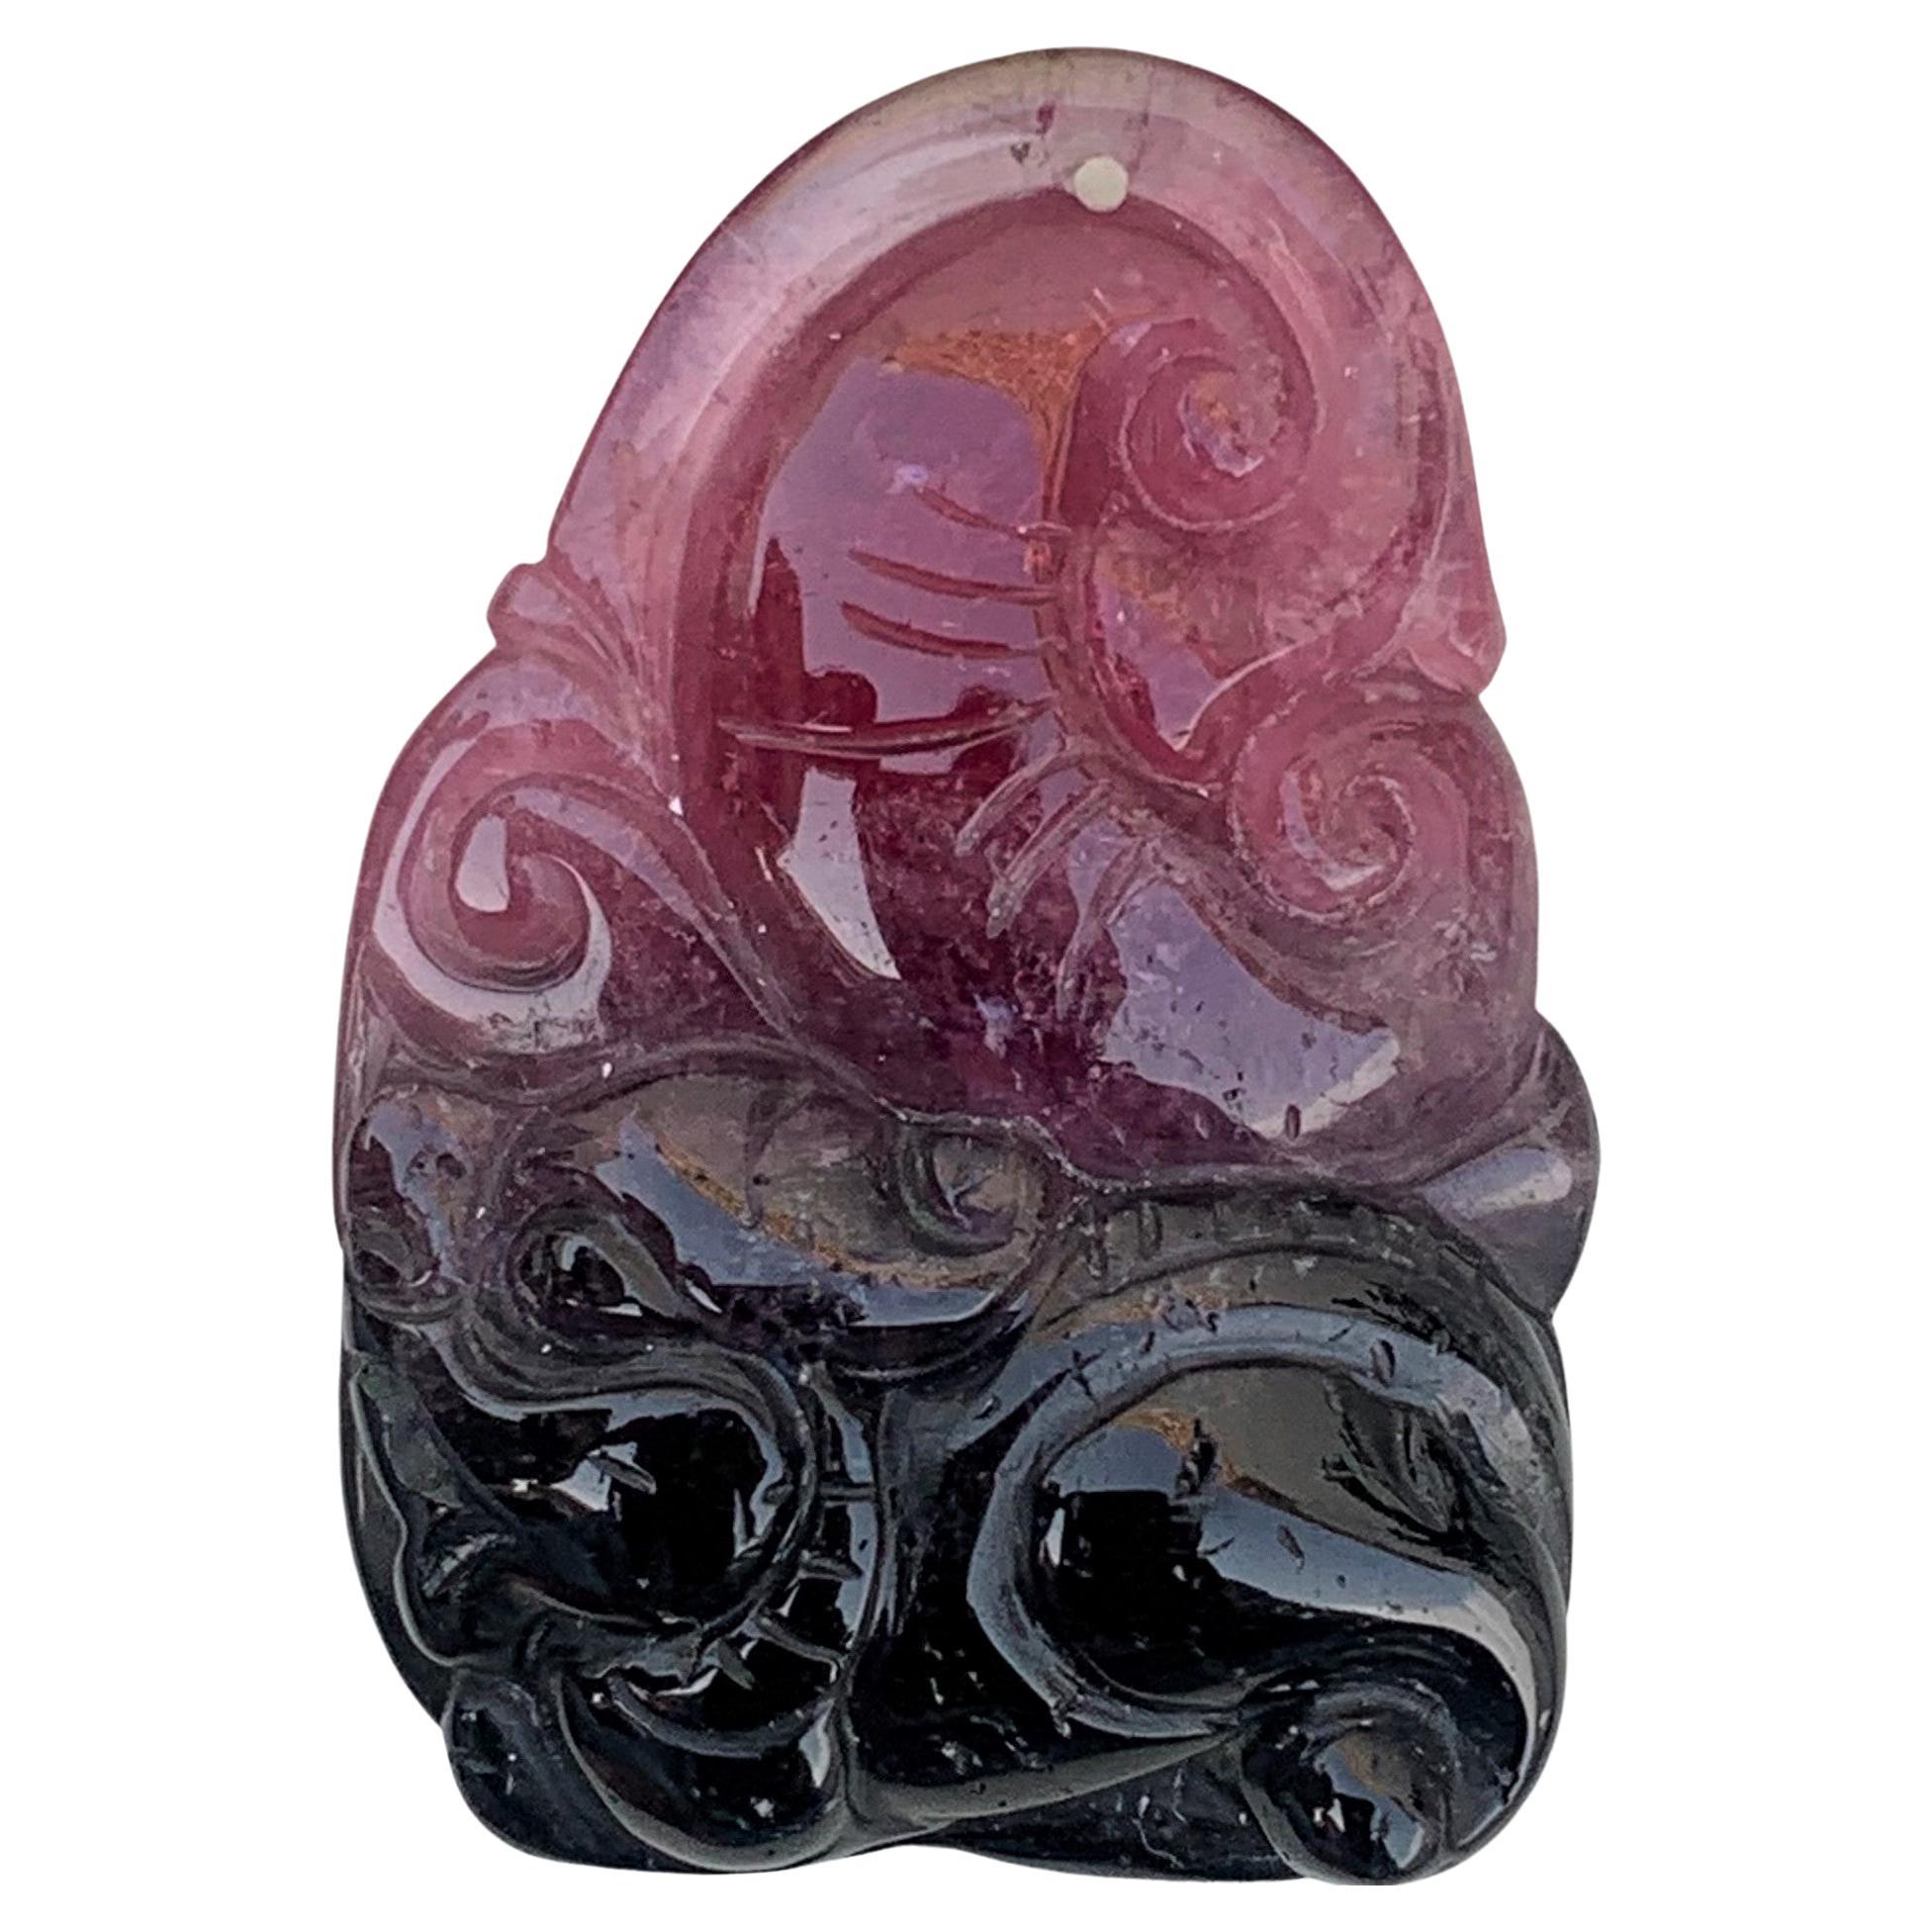 46.55 Carat Stunning Bi Color Drilled Tourmaline Carving from Madagascar Africa For Sale